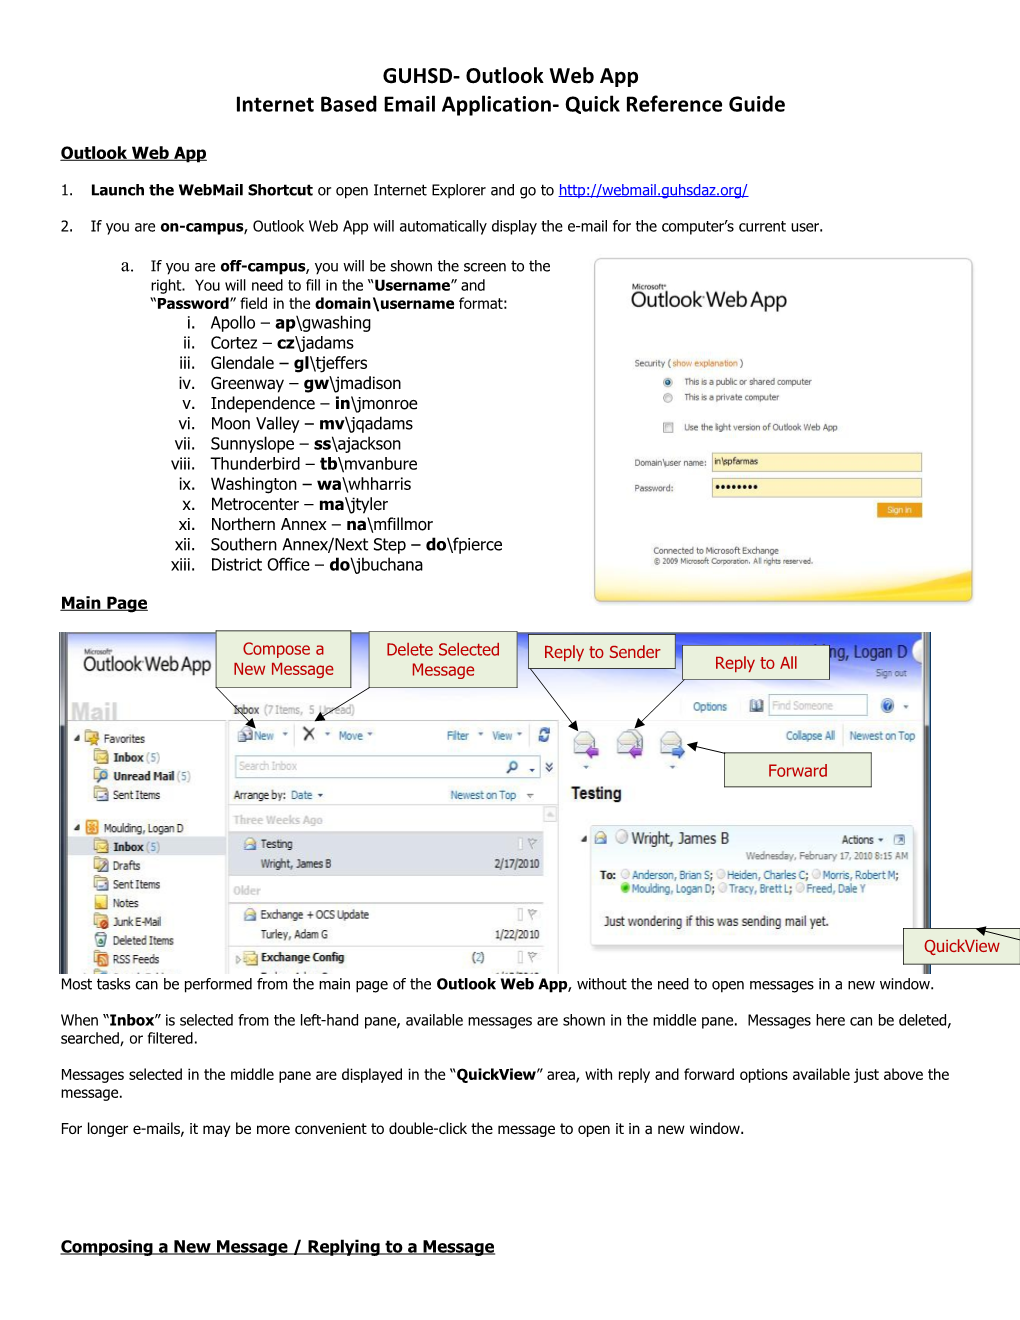 Internet Based Email Application- Quick Reference Guide